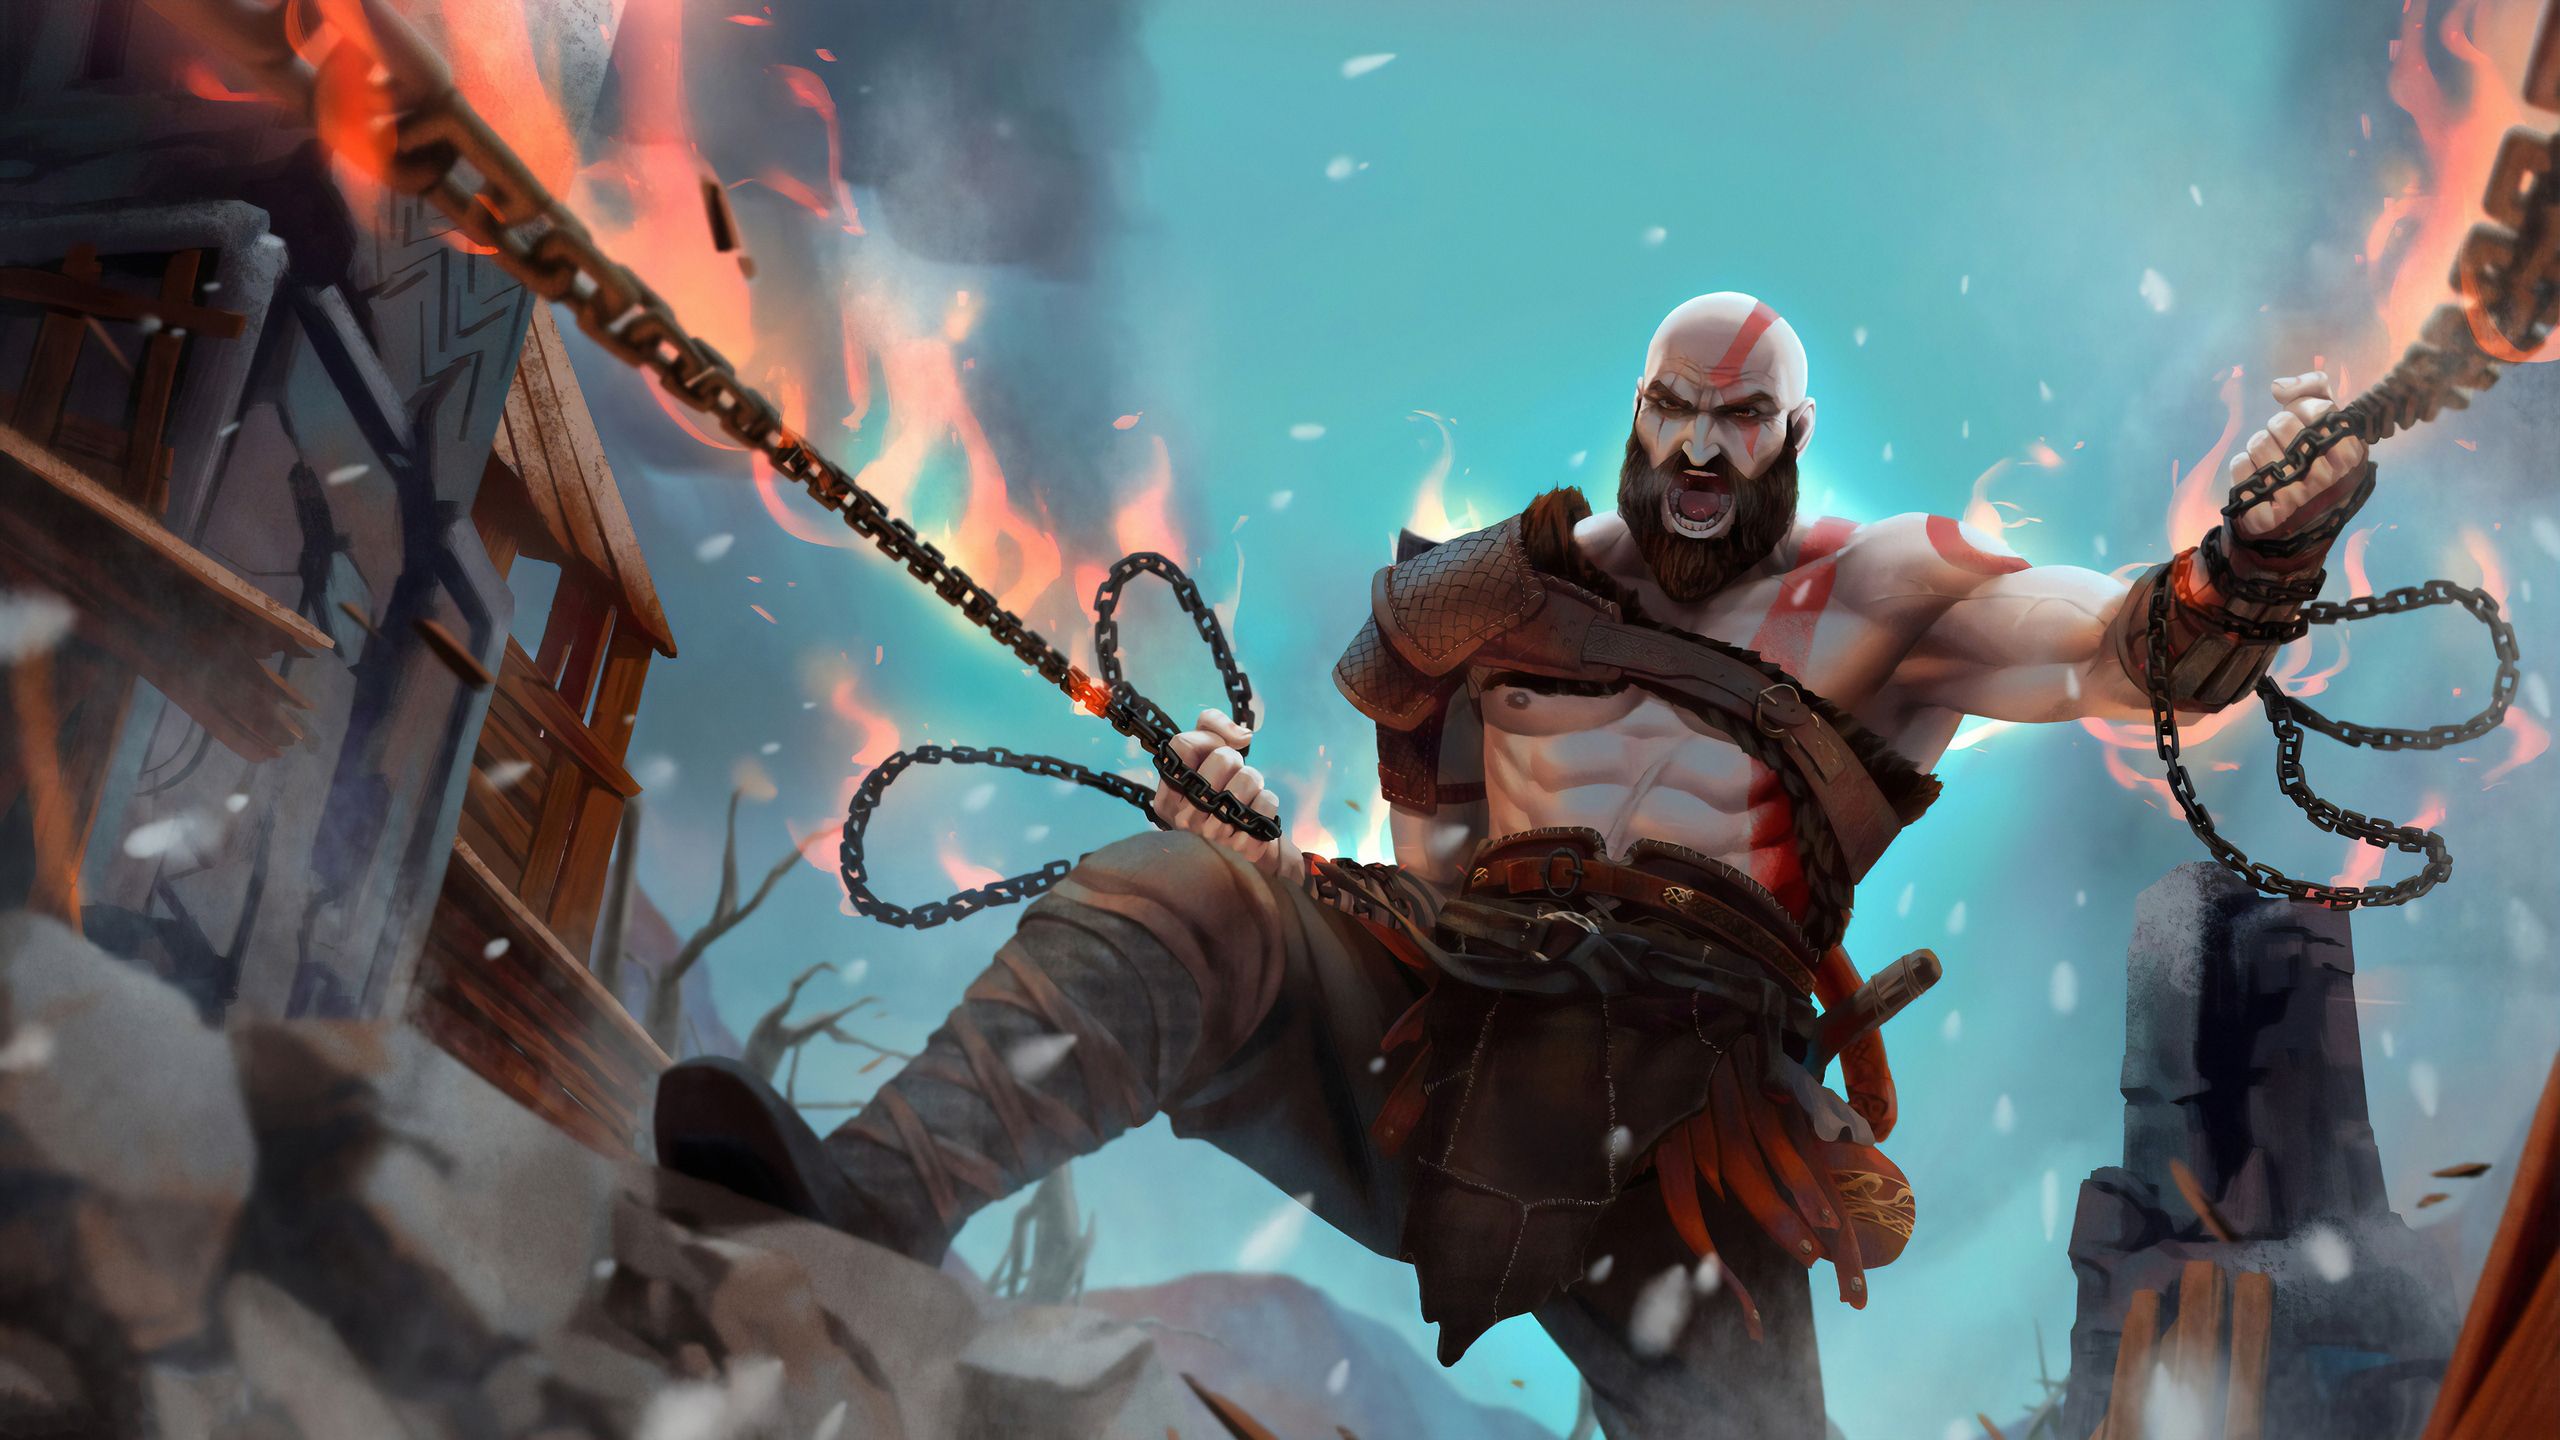 Kratos 4k Artwork New 1440P Resolution HD 4k Wallpaper, Image, Background, Photo and Picture